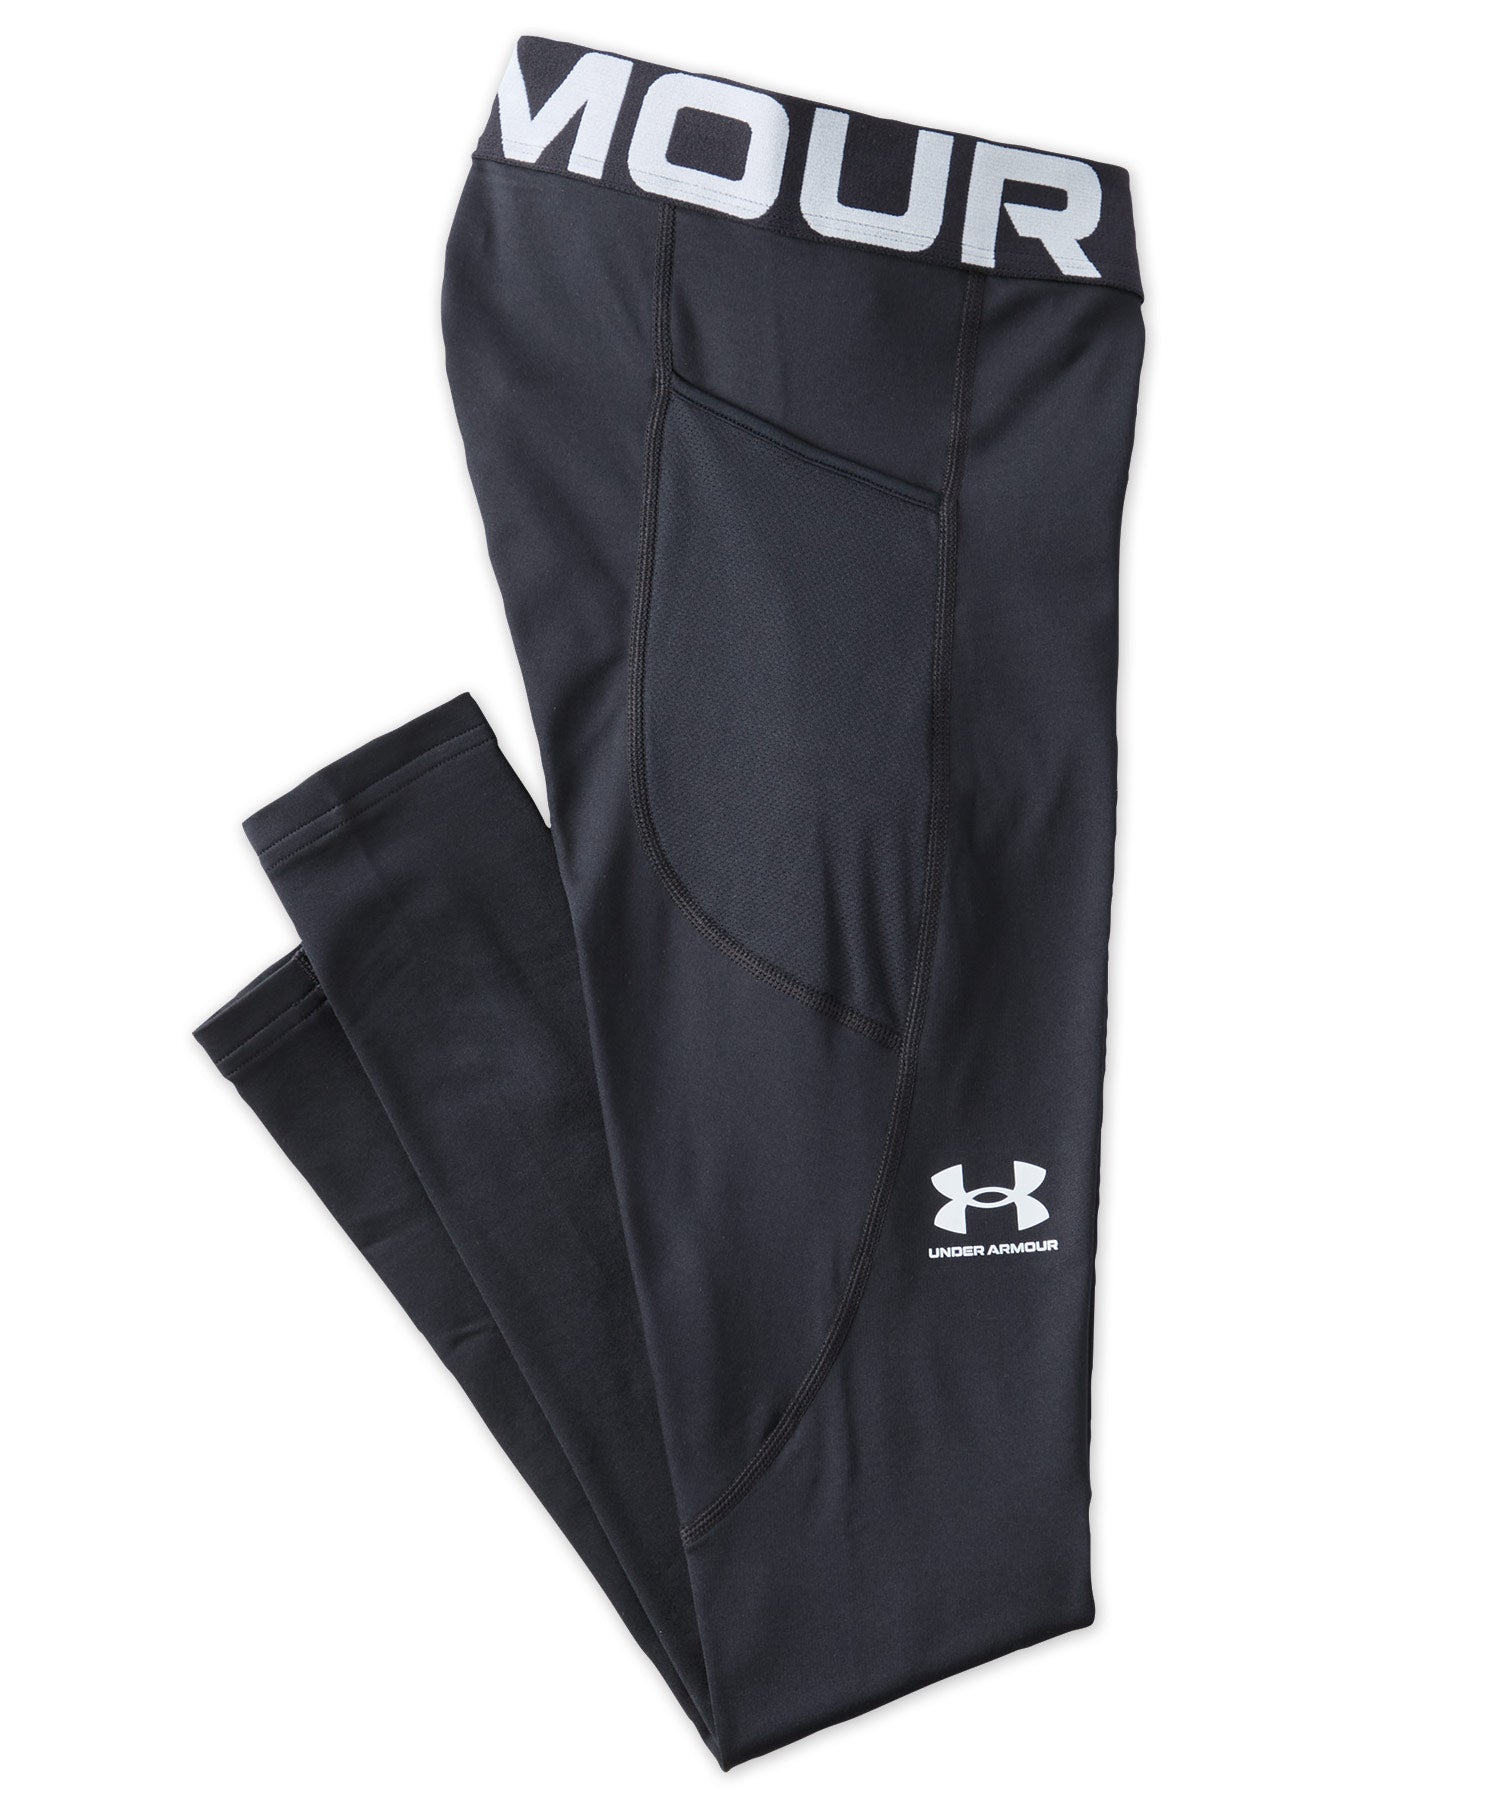 Under Armour Men's Big & Tall Vital Woven Warm-Up Pants